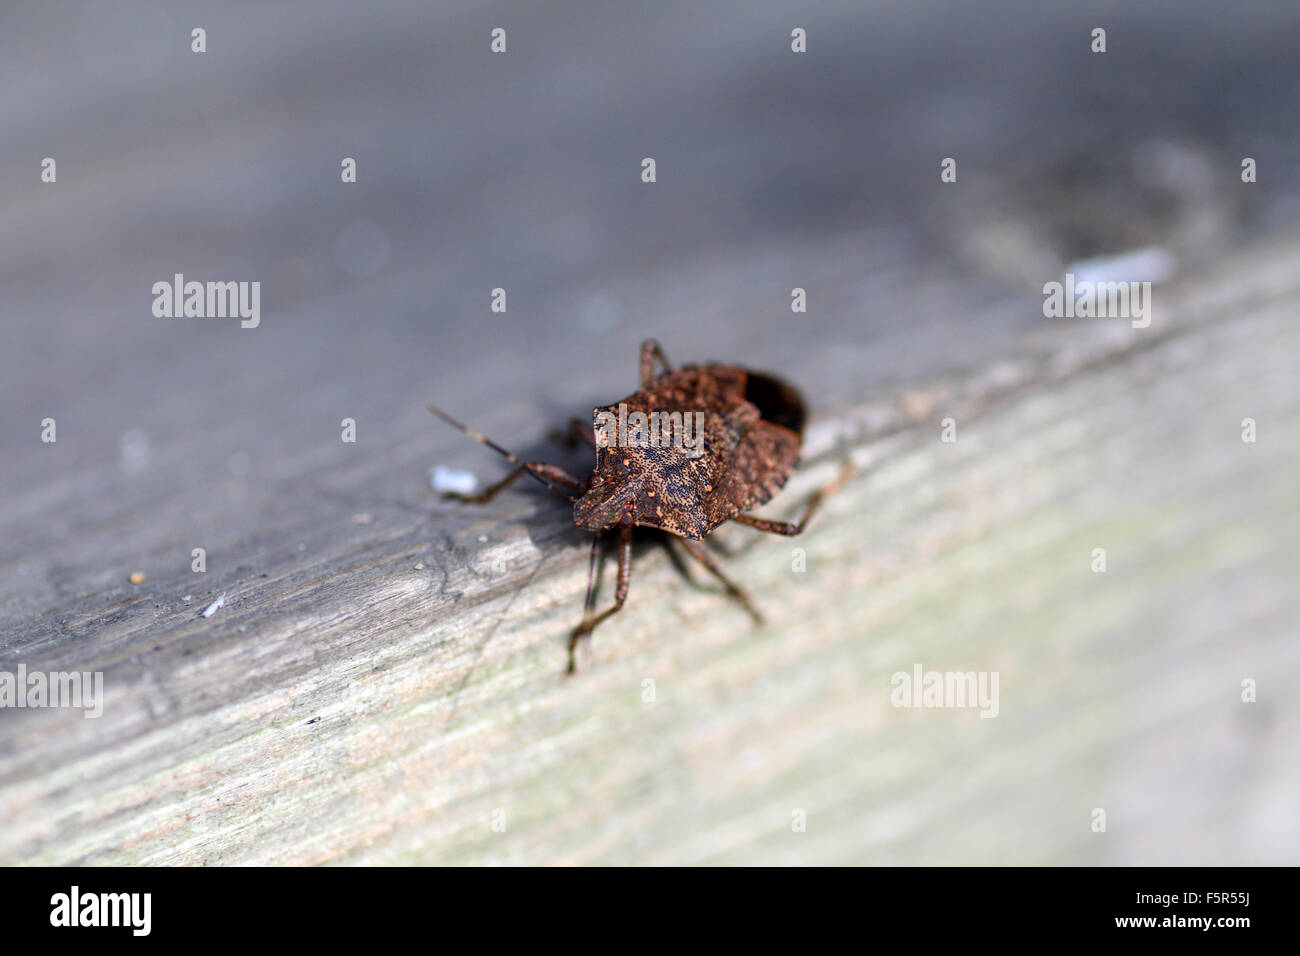 Brown marmorated stink bug (Halyomorpha halys) in Giappone Foto Stock